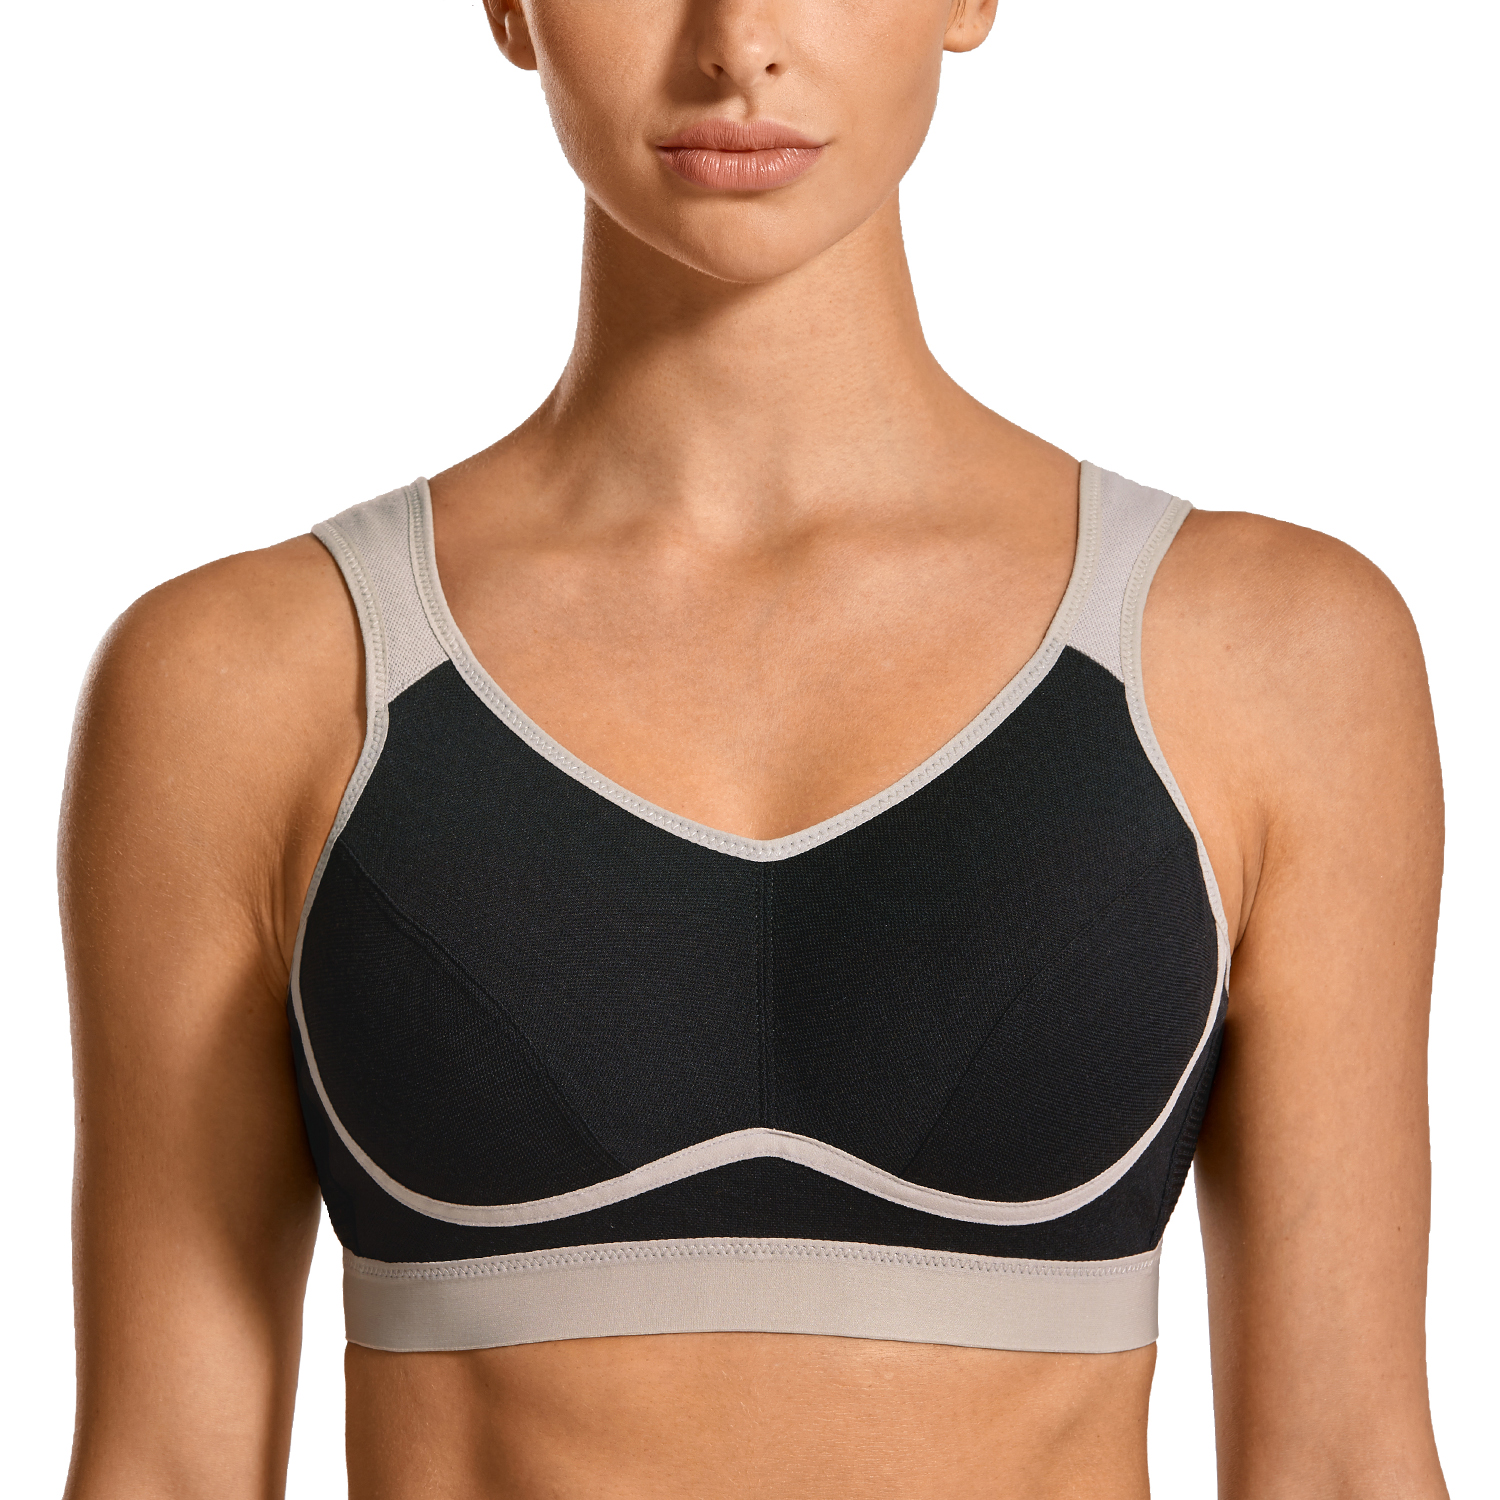 SYROKAN Womens Workout Sports Bra High Impact Support Bounce Control Wirefree Mesh Racerback Top 